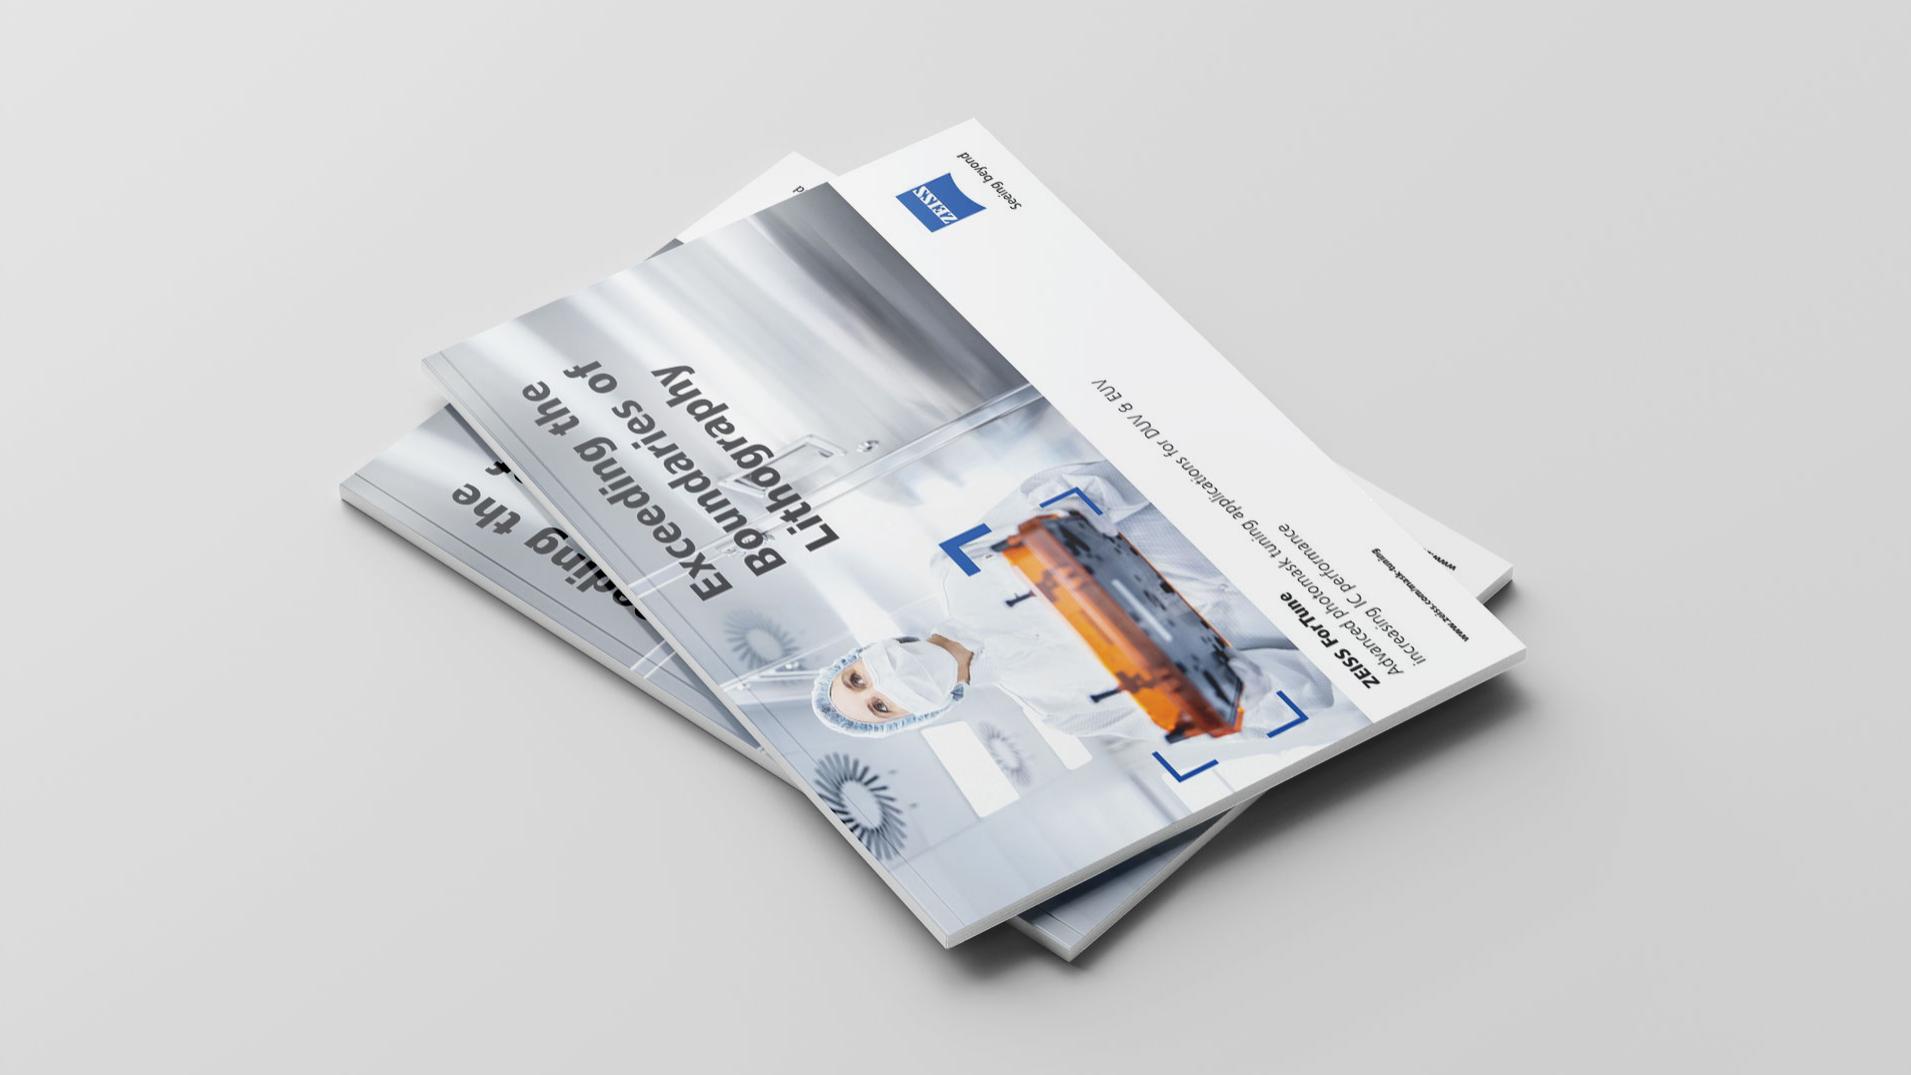 Several brochures with ZEISS SMT products